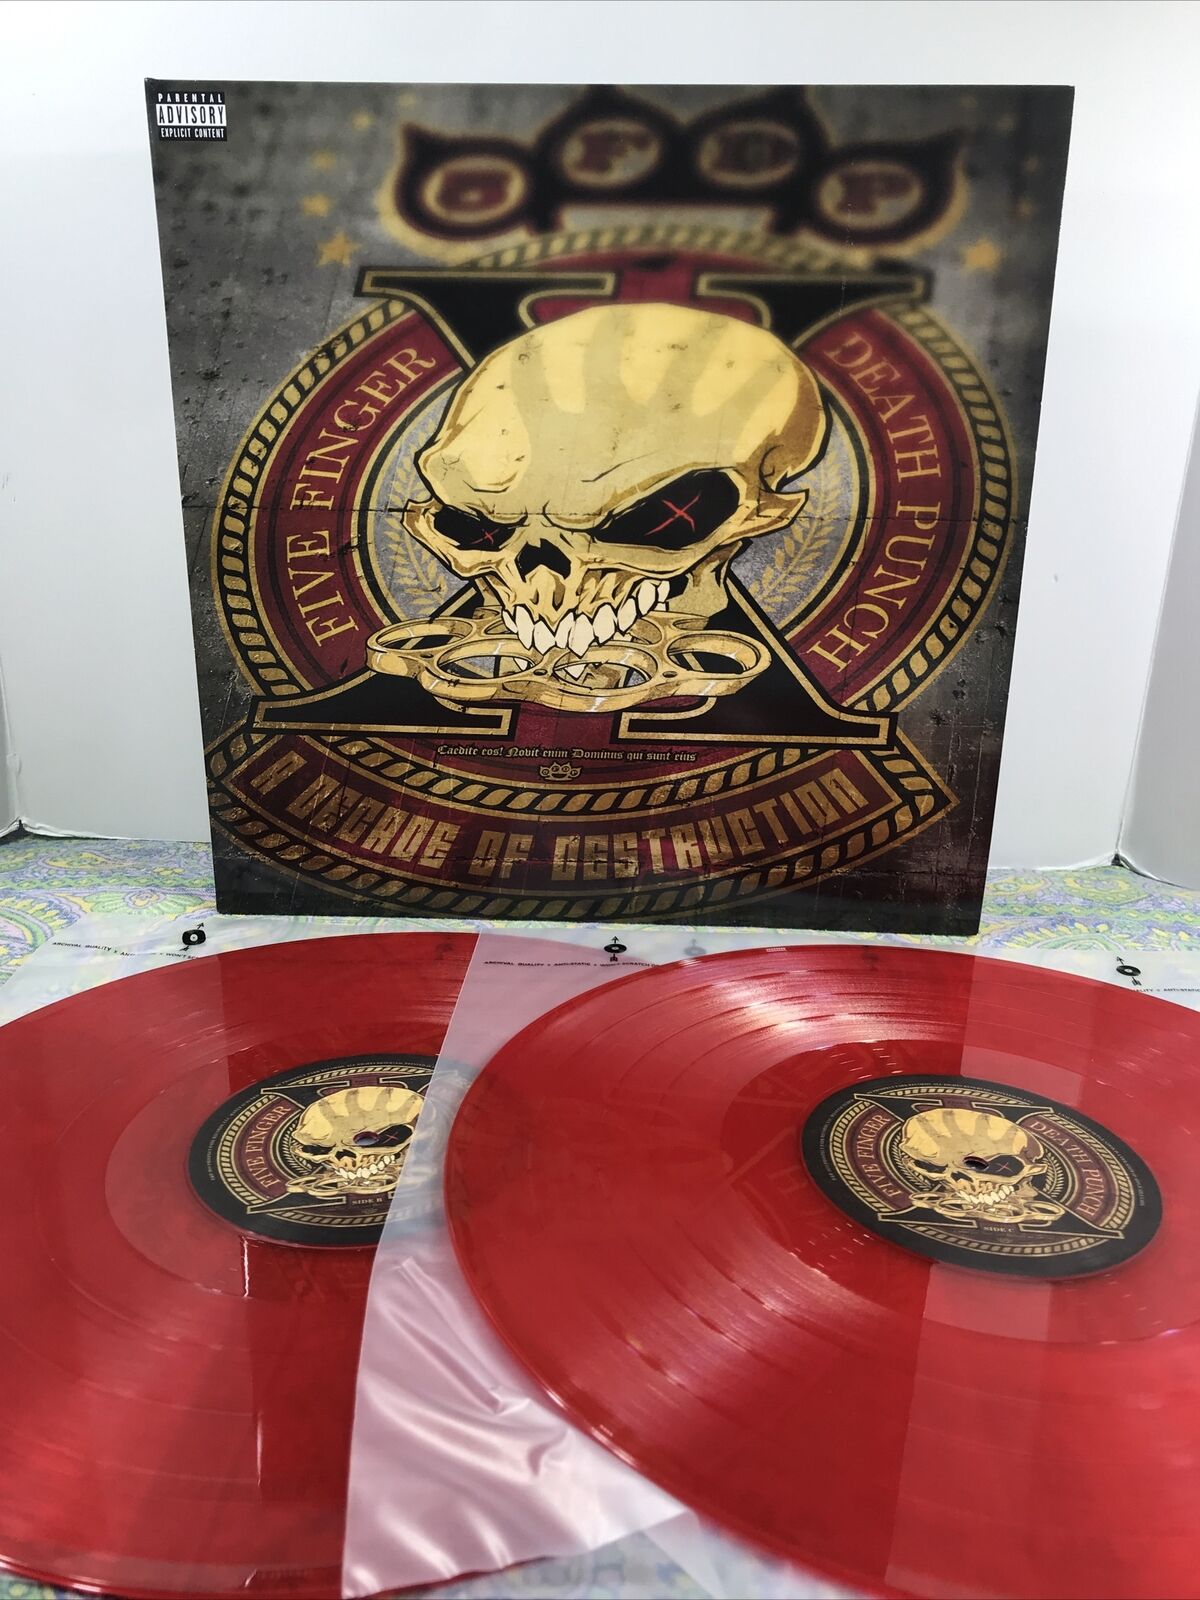 A Decade Of Destruction by Five Finger Death Punch 5FDP (2 LP, 2020,Red) VG+/VG+